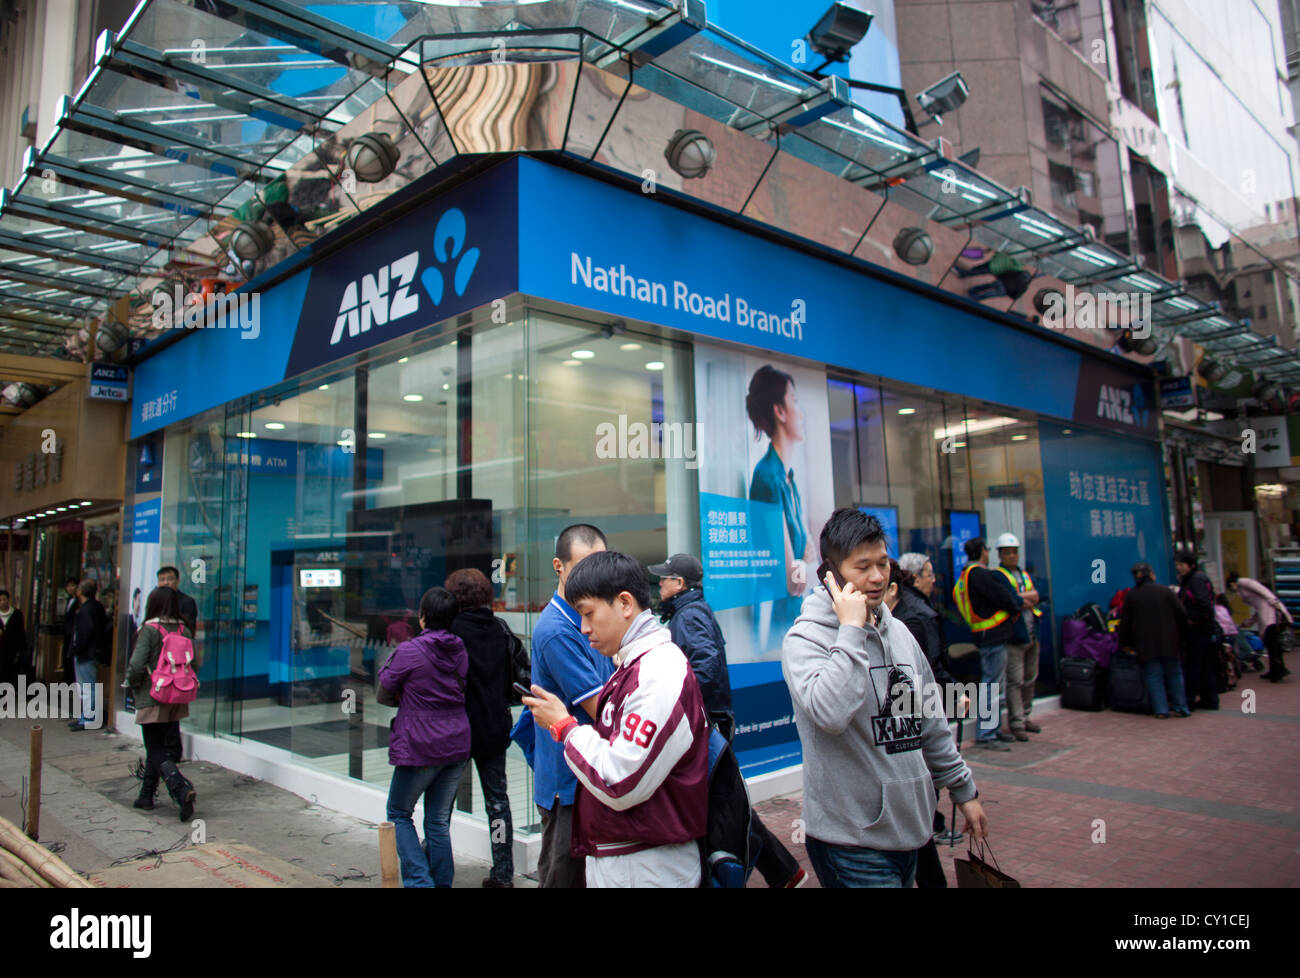 Anz Centre High Resolution Stock Photography and Images - Alamy